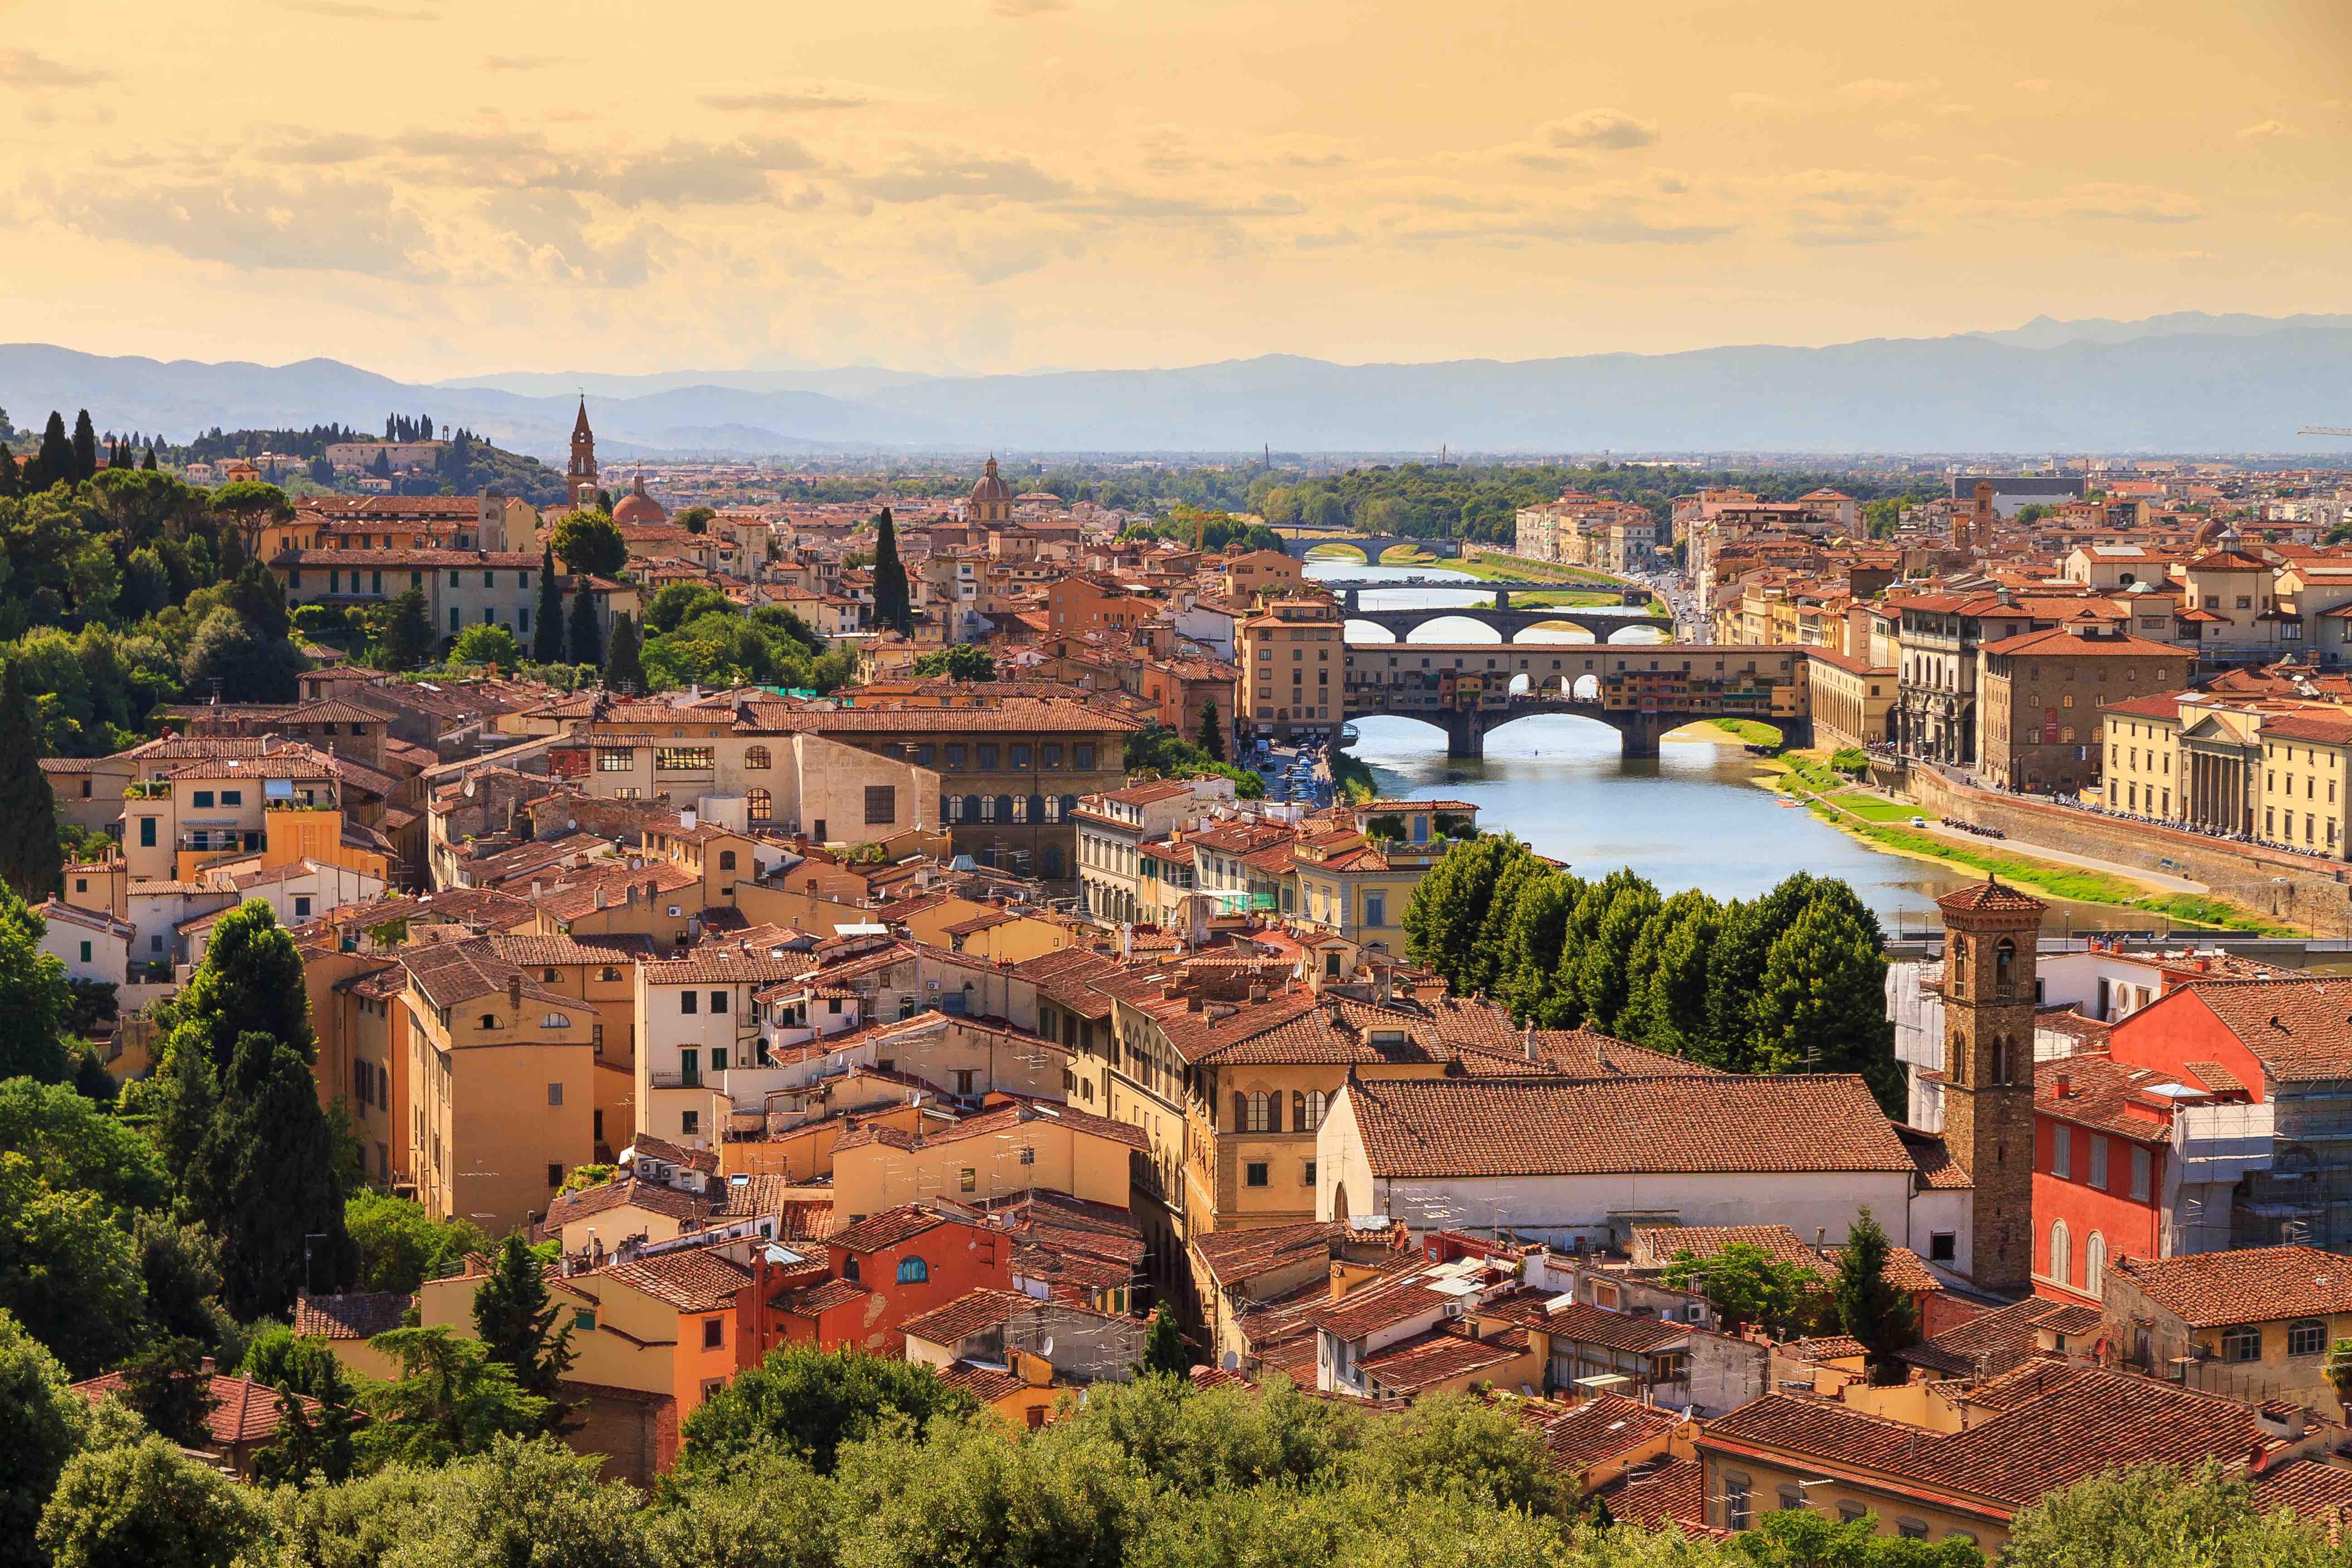 Beautiful cityscape skyline of Florence, Italy with the bridges over the river Arno in the distance